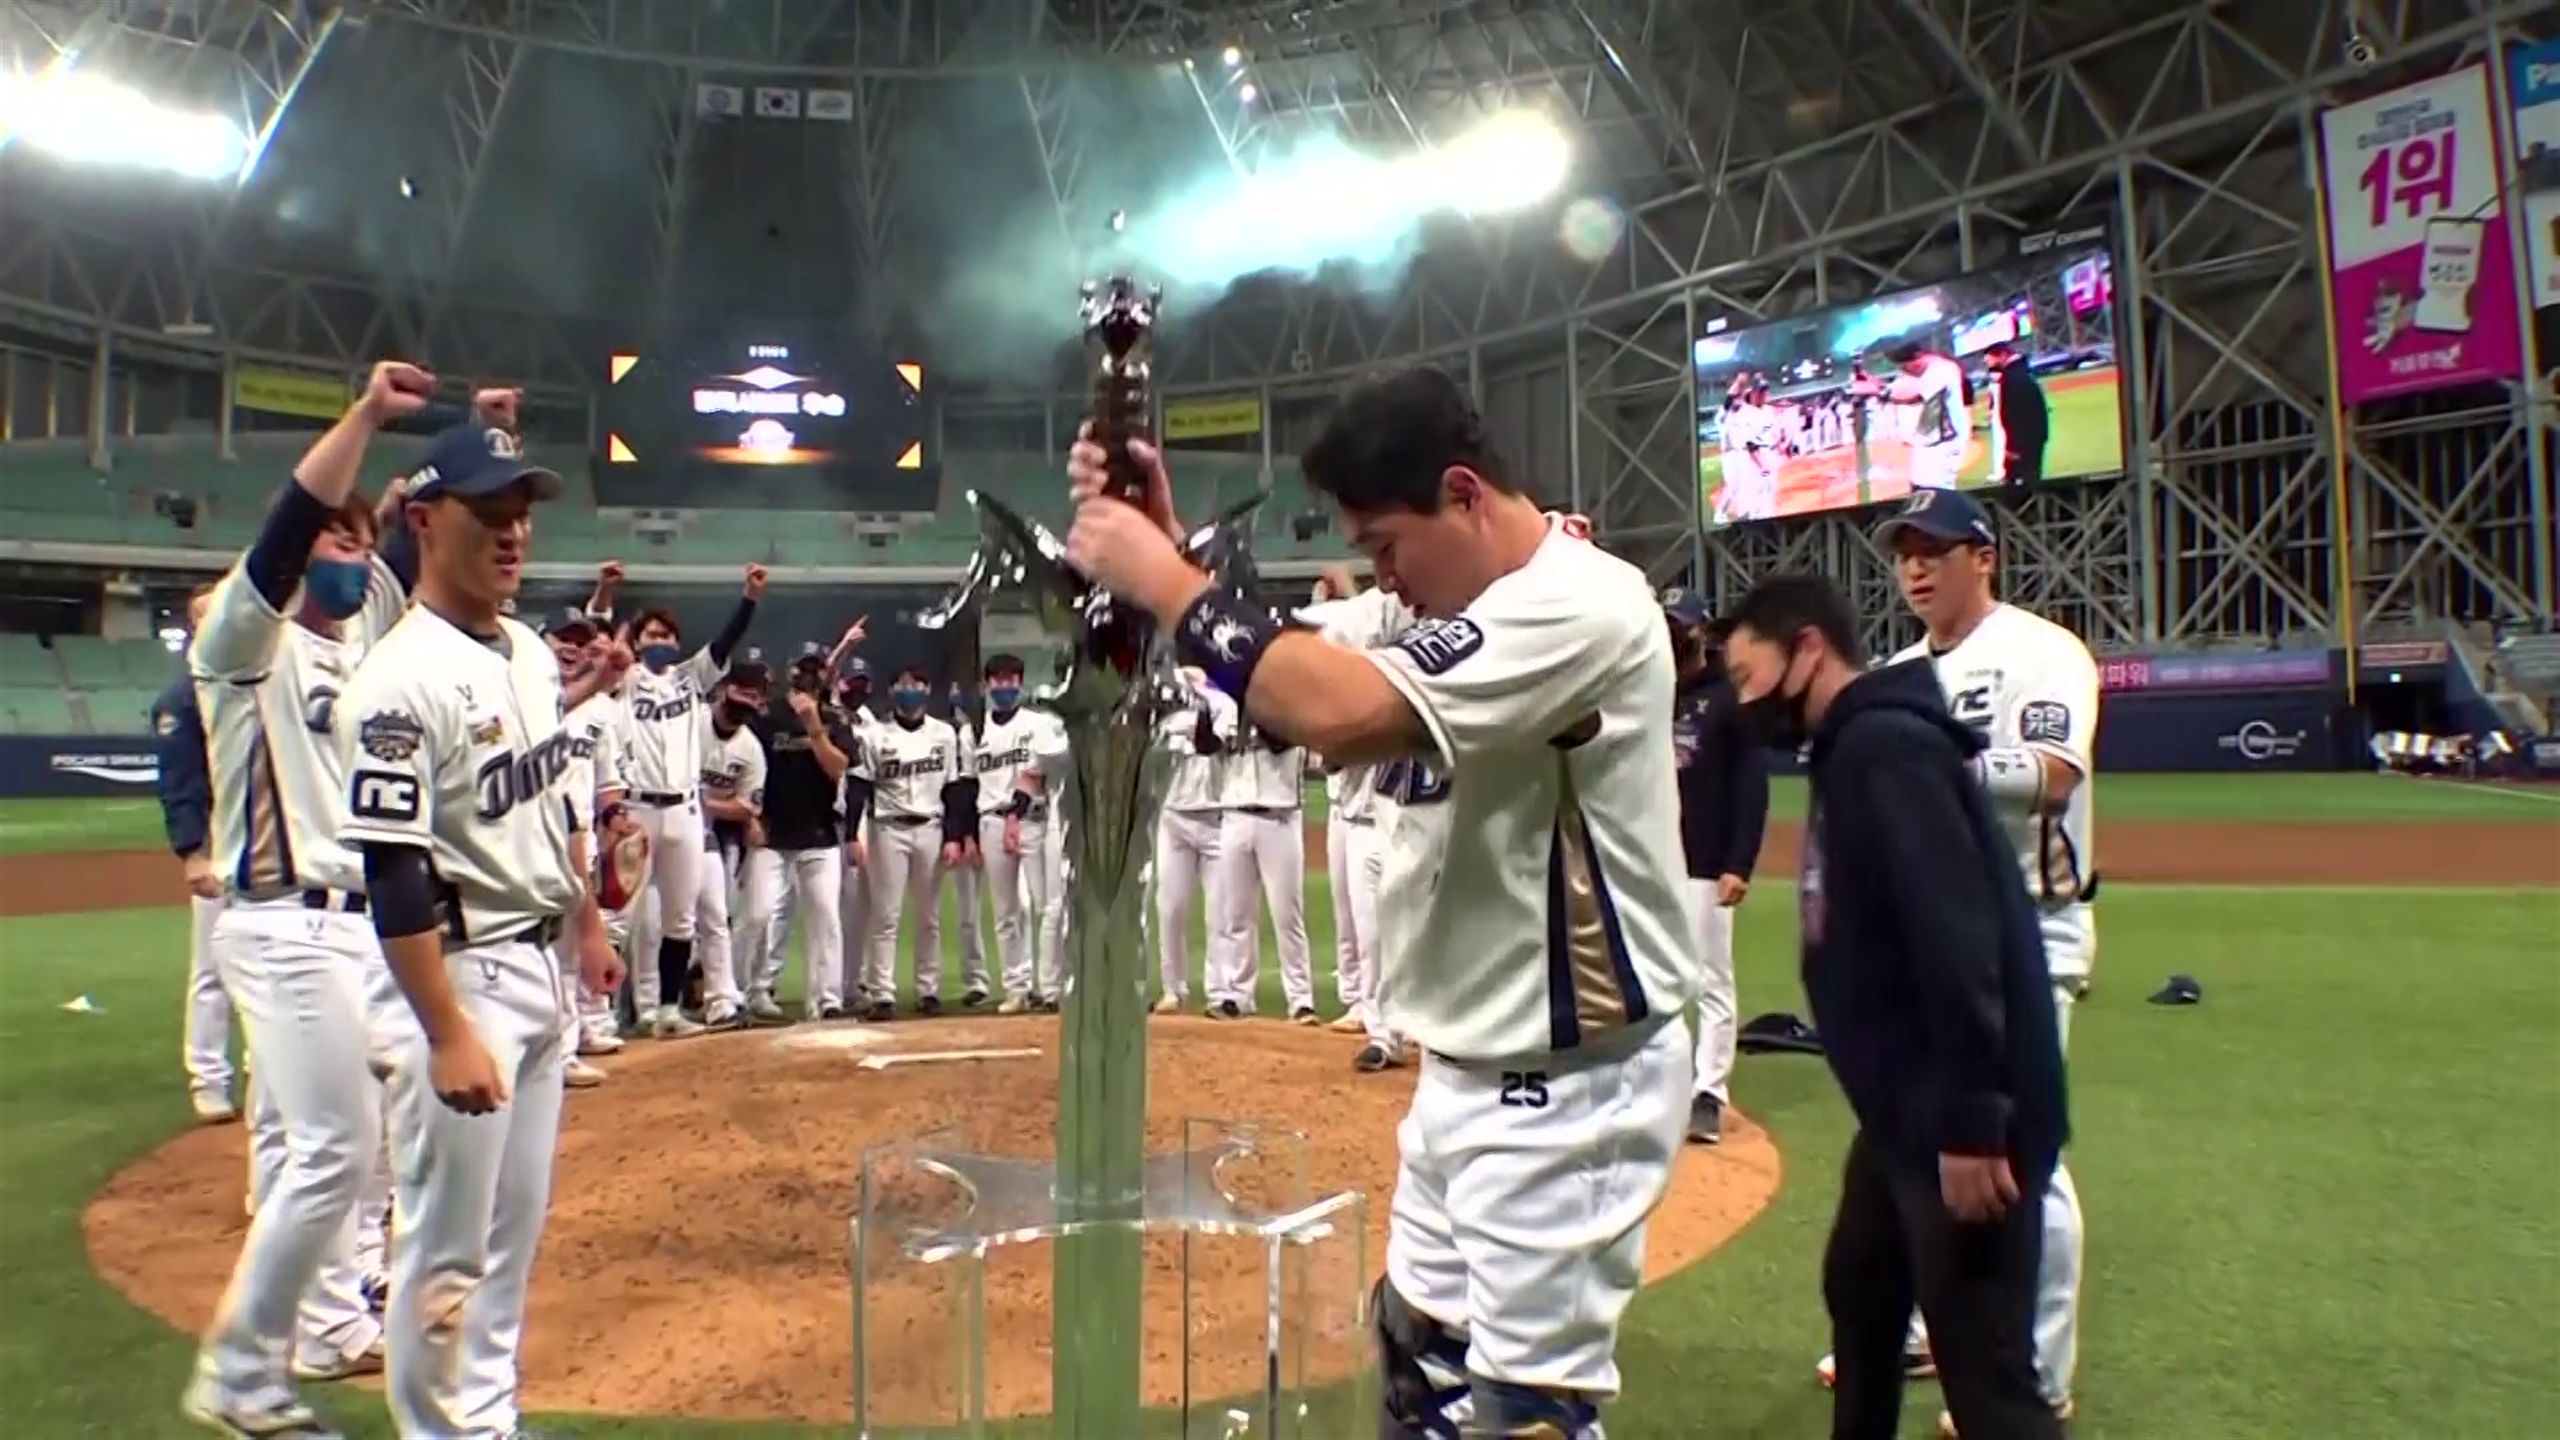 Best trophy of the year? South Korean basketball team wield a sword in dramatic ceremony - Baseball / Softball video